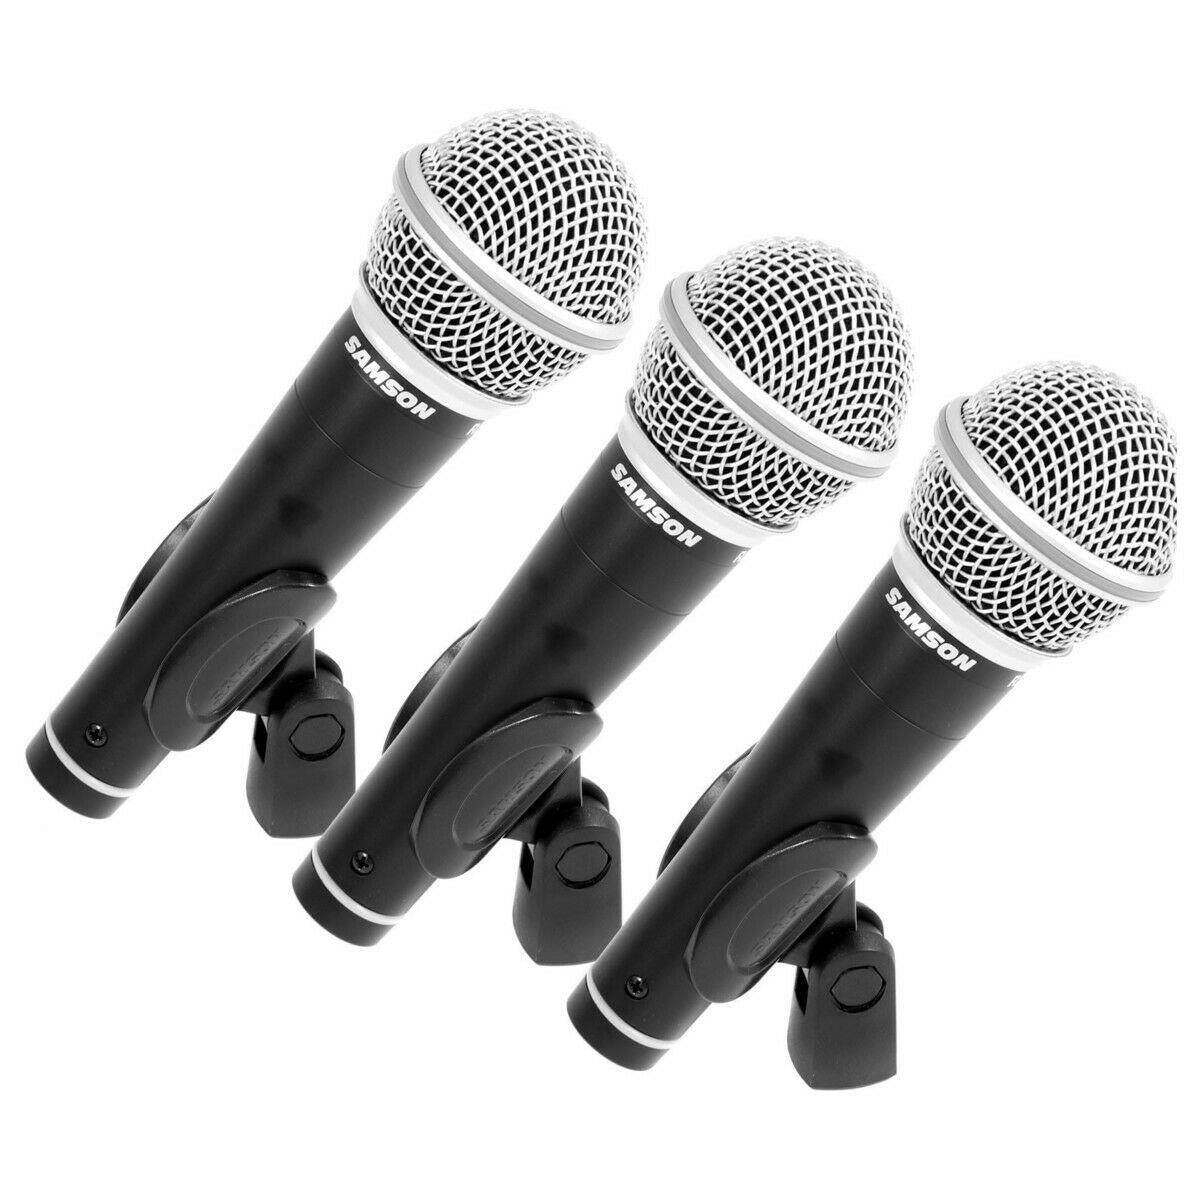 Samson R21 3-Pack Dynamic Vocal Cardioid Handheld Microphones+Mic Clips+Case